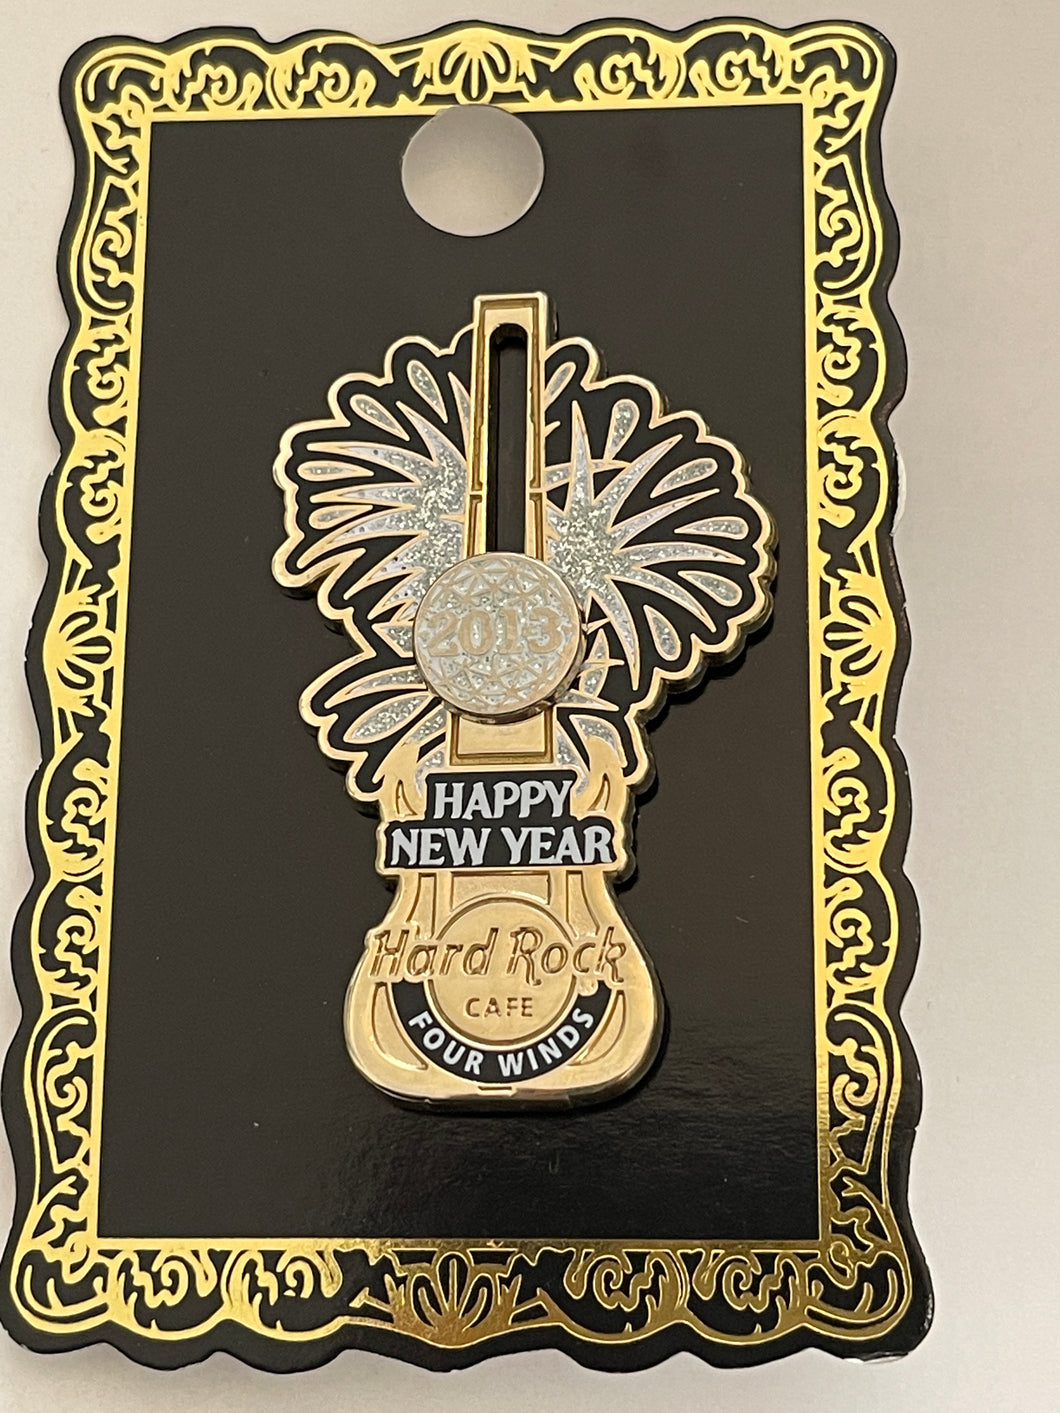 Hard Rock Cafe Happy New Year 2013 Four Winds Michigan Collector Pin